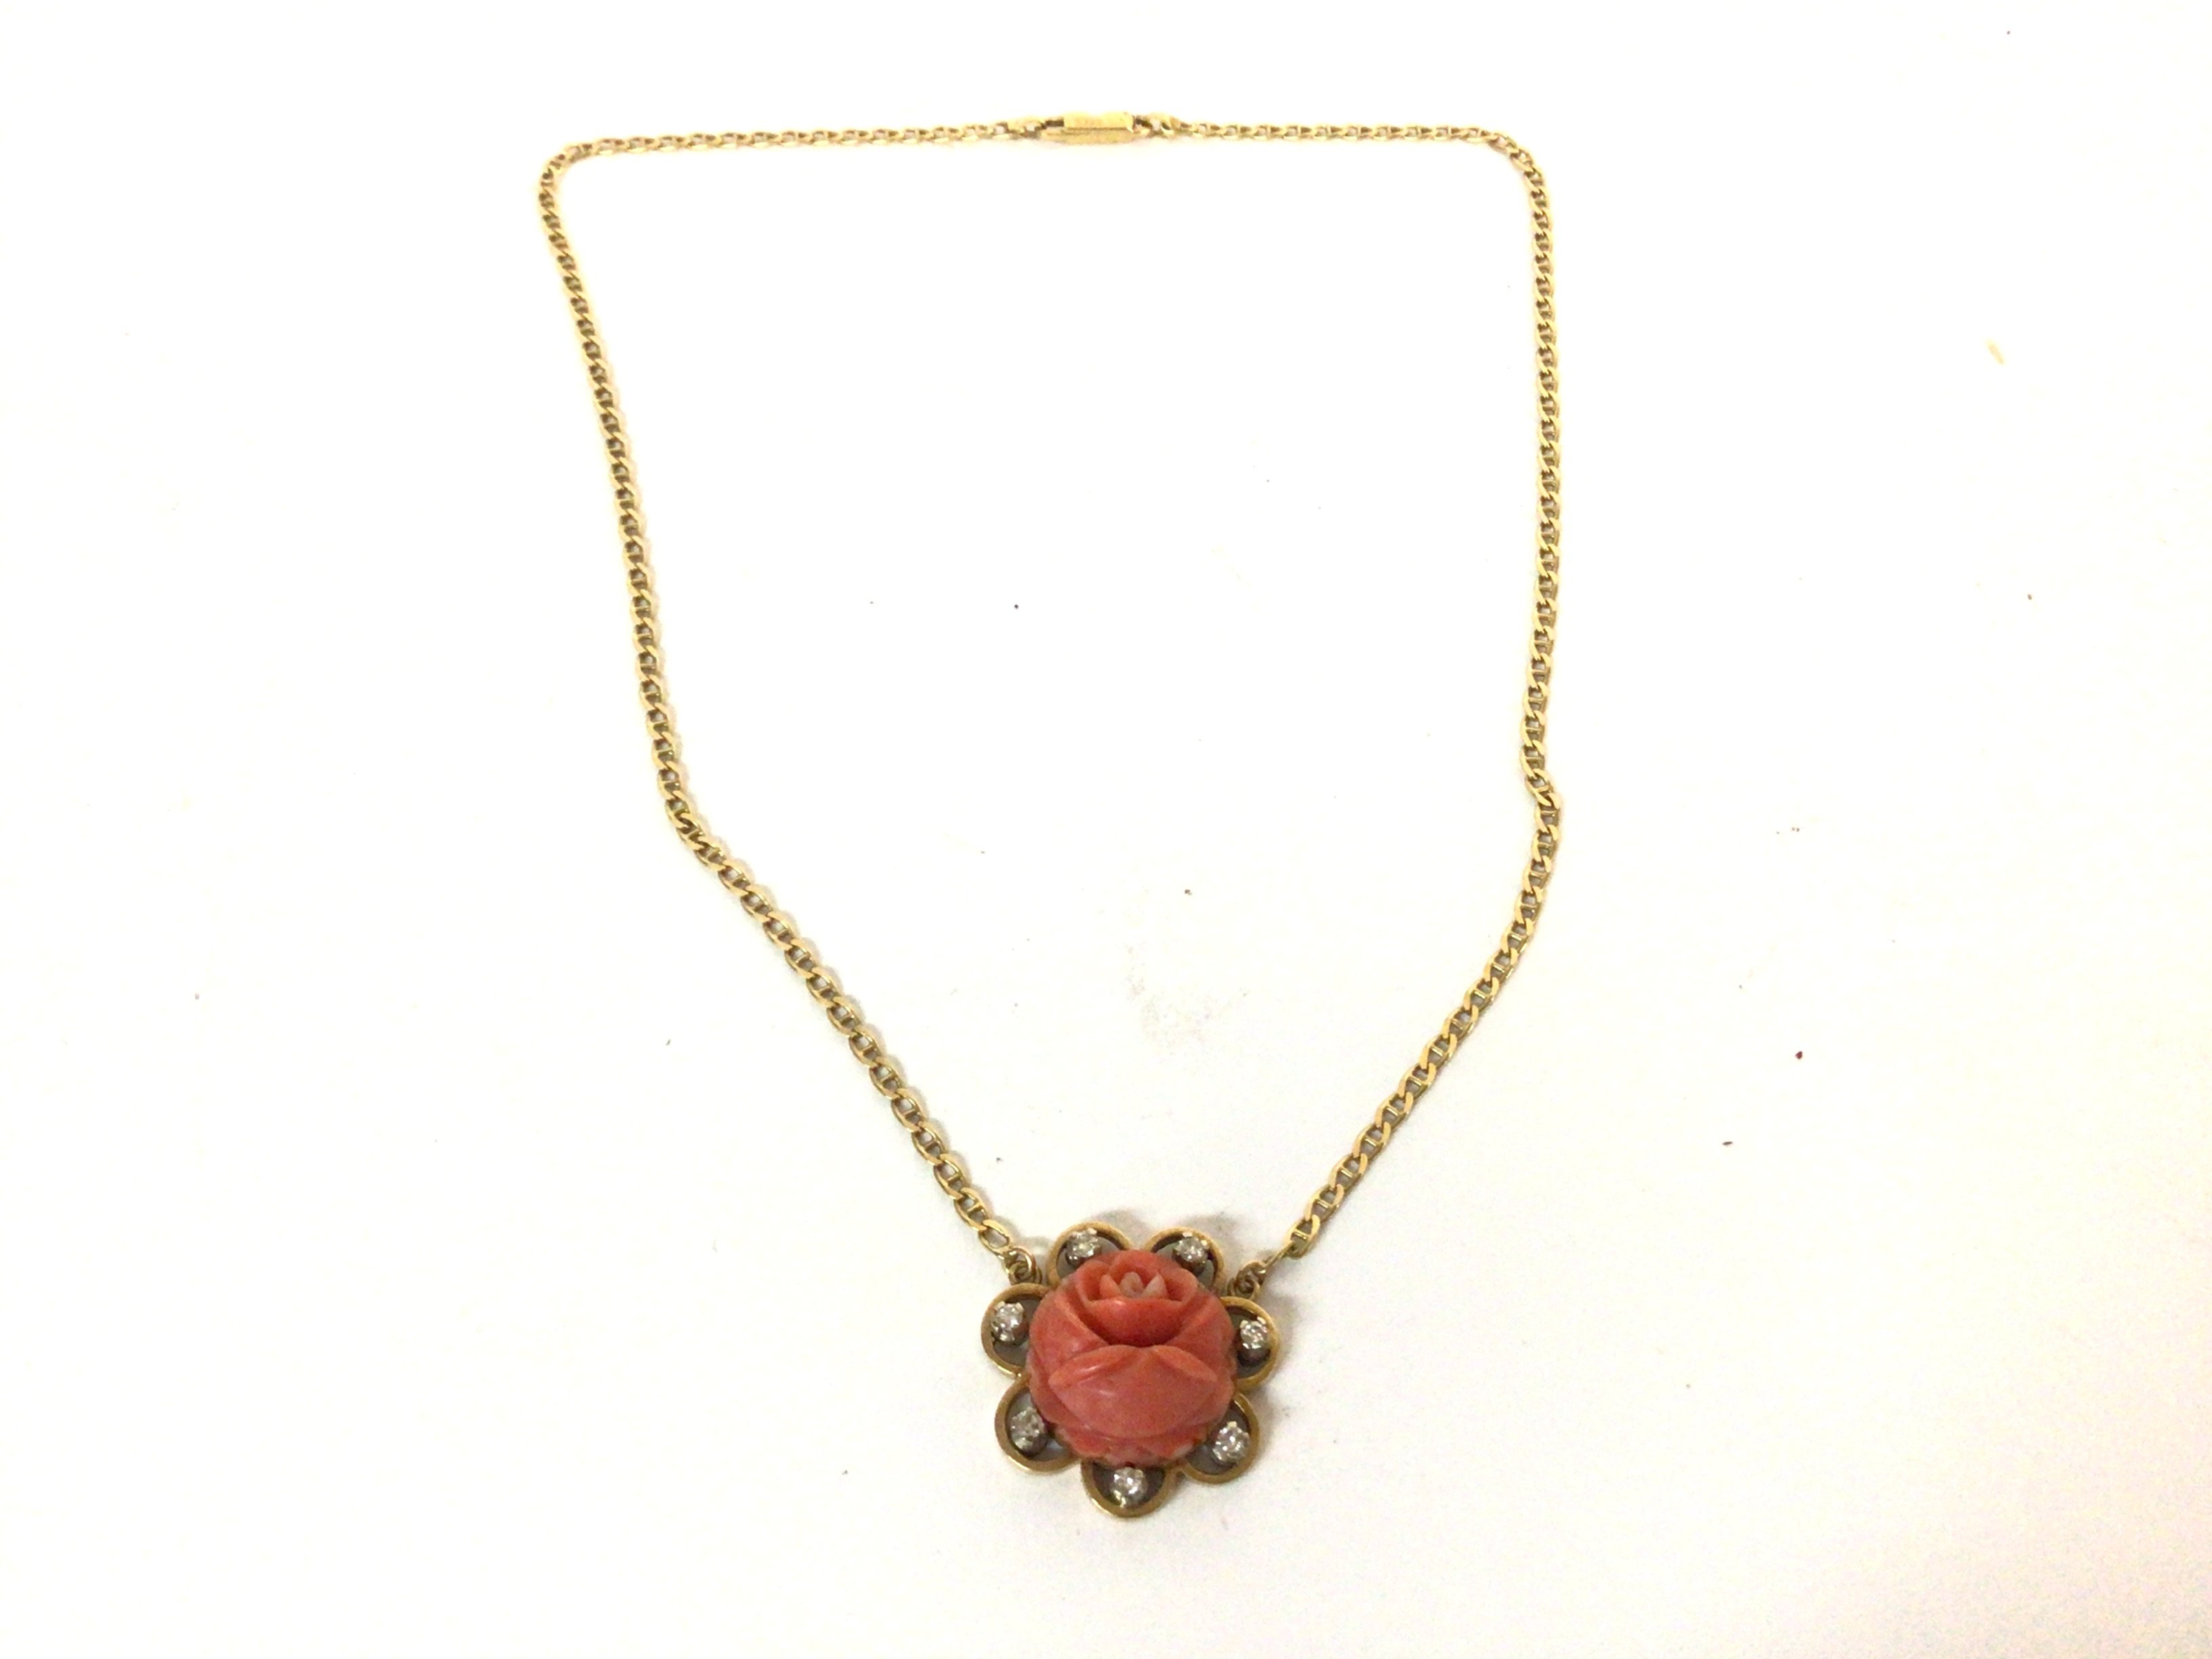 A coral and diamond pendant on a chain. Both marke